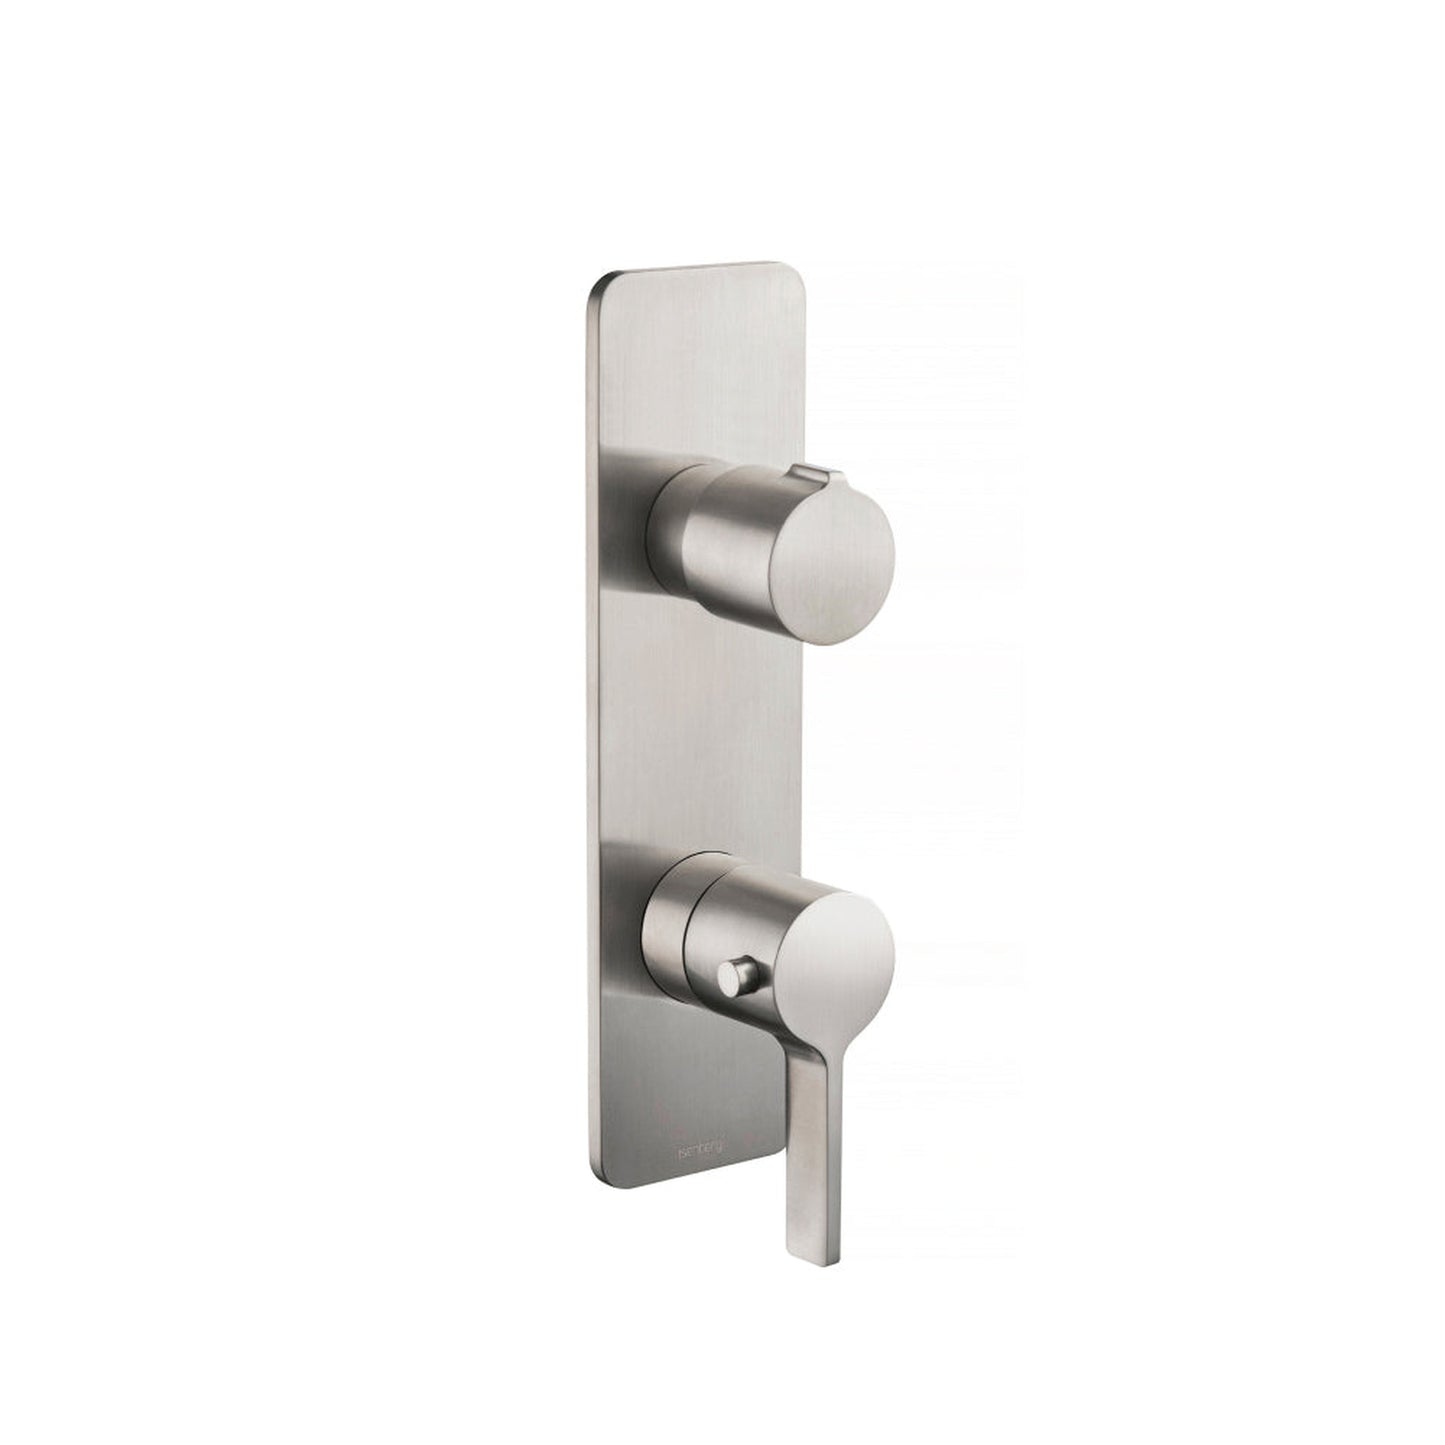 Isenberg Serie 260 Trim for Thermostatic Valve in Brushed Nickel